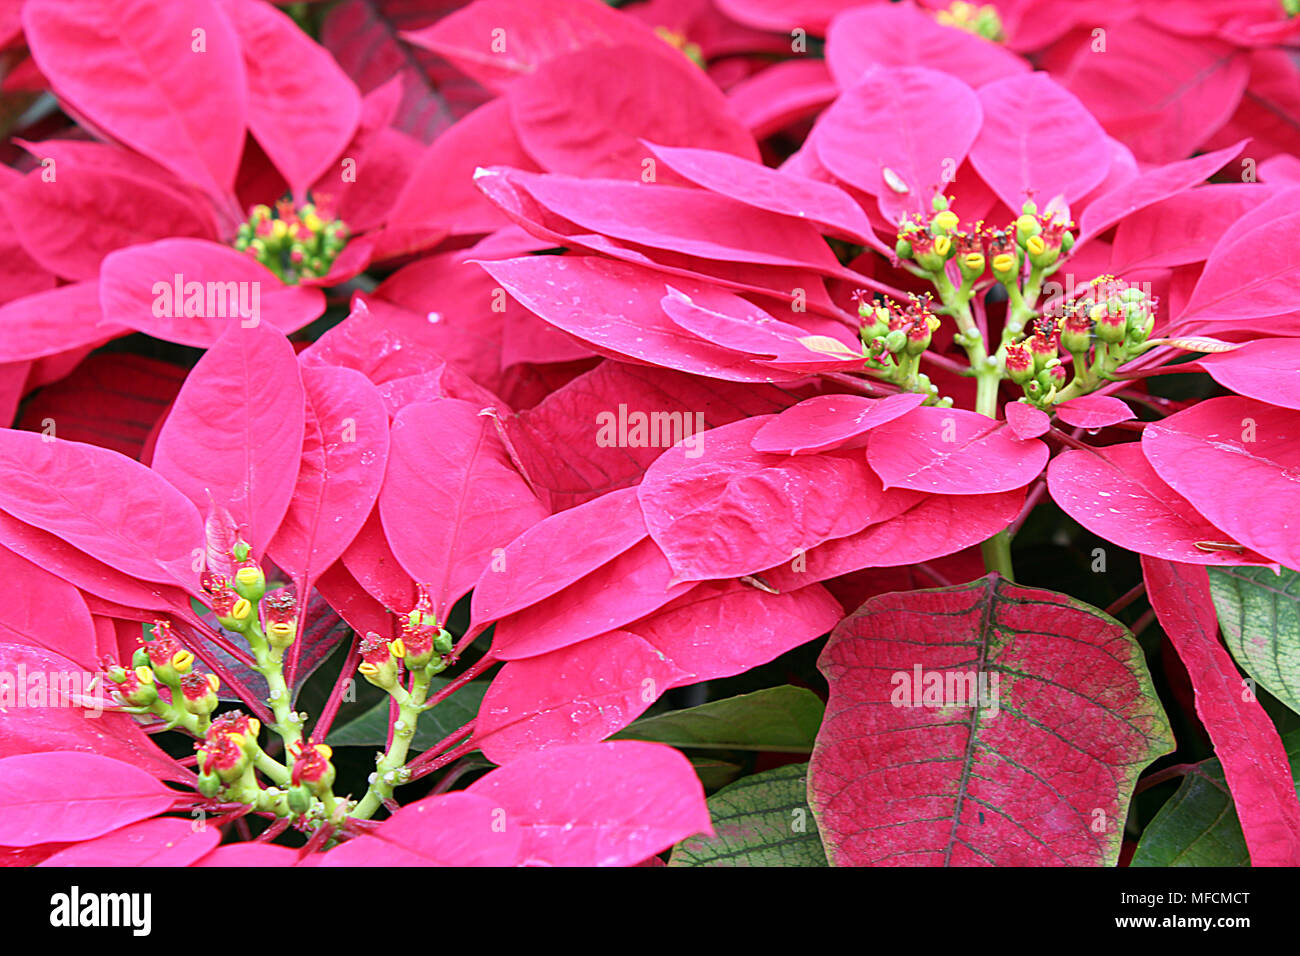 The poinsettia is a commercially important plant species of the ...